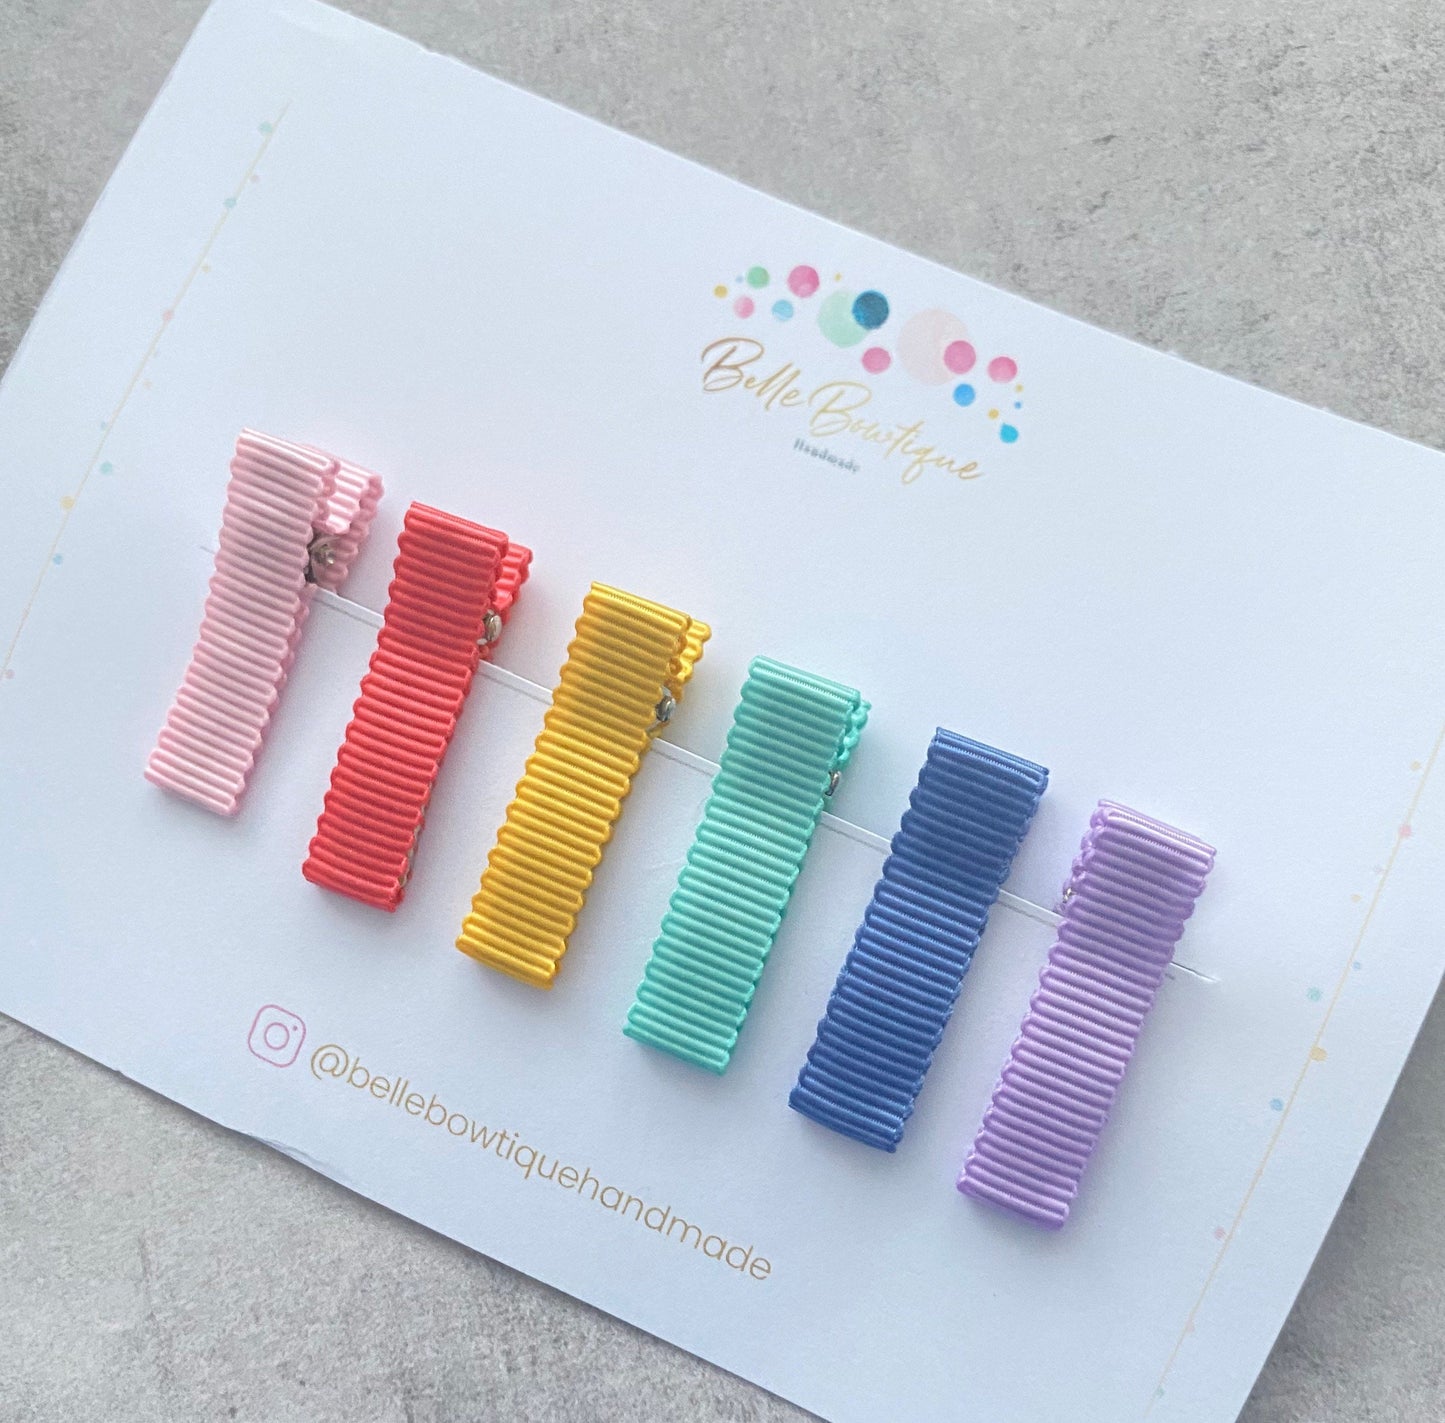 Rainbow ribbon fringe clips pack of 6 - small clips - mini clips - Clip pack - baby hair clips - toddler hair clips